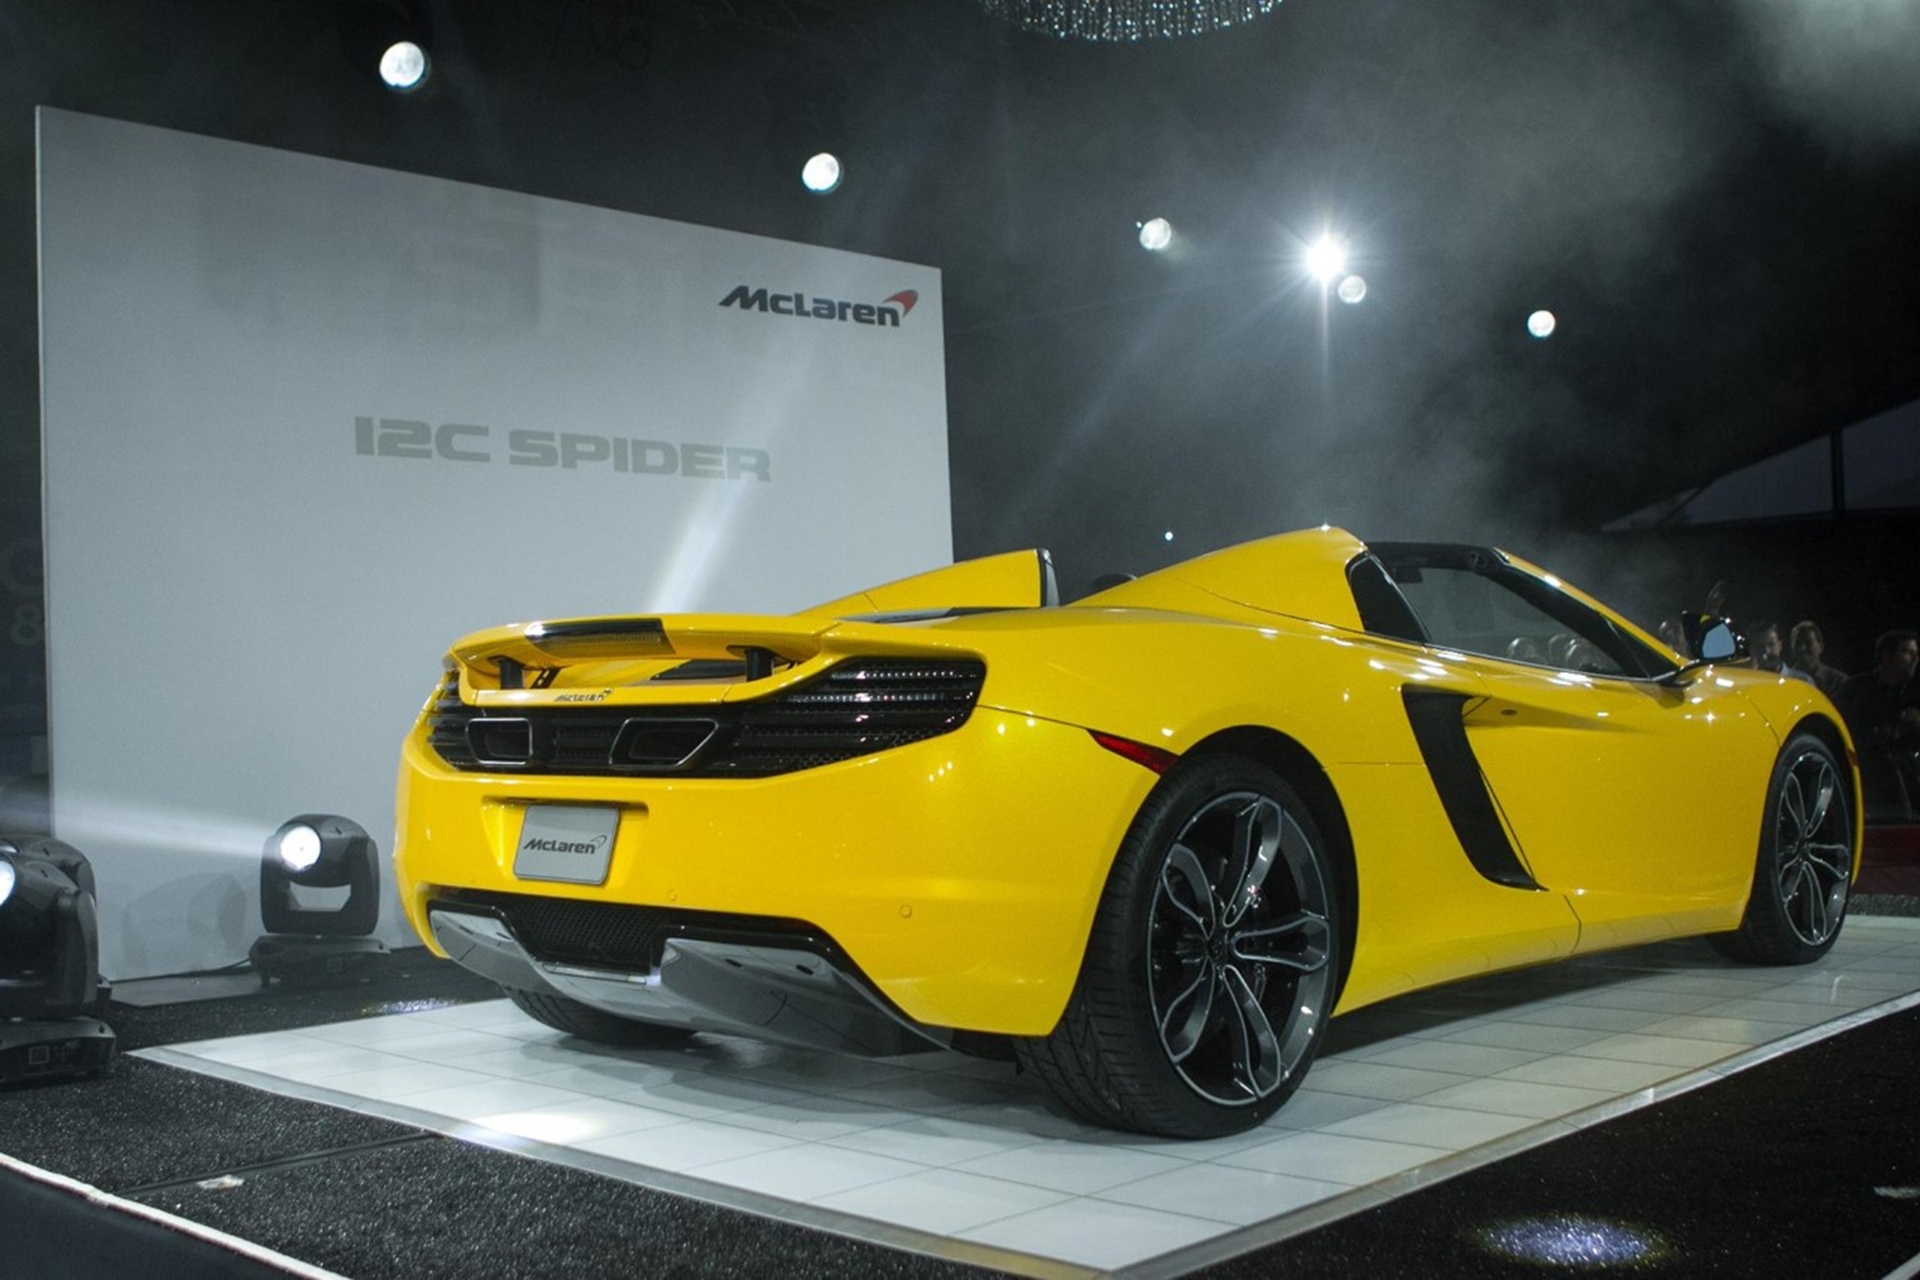 MCLAREN STAGES GLOBAL UNVEIL OF DRAMATIC 12C SPIDER AT GOODING & COMPANY PREVIEW AT PEBBLE BEACH